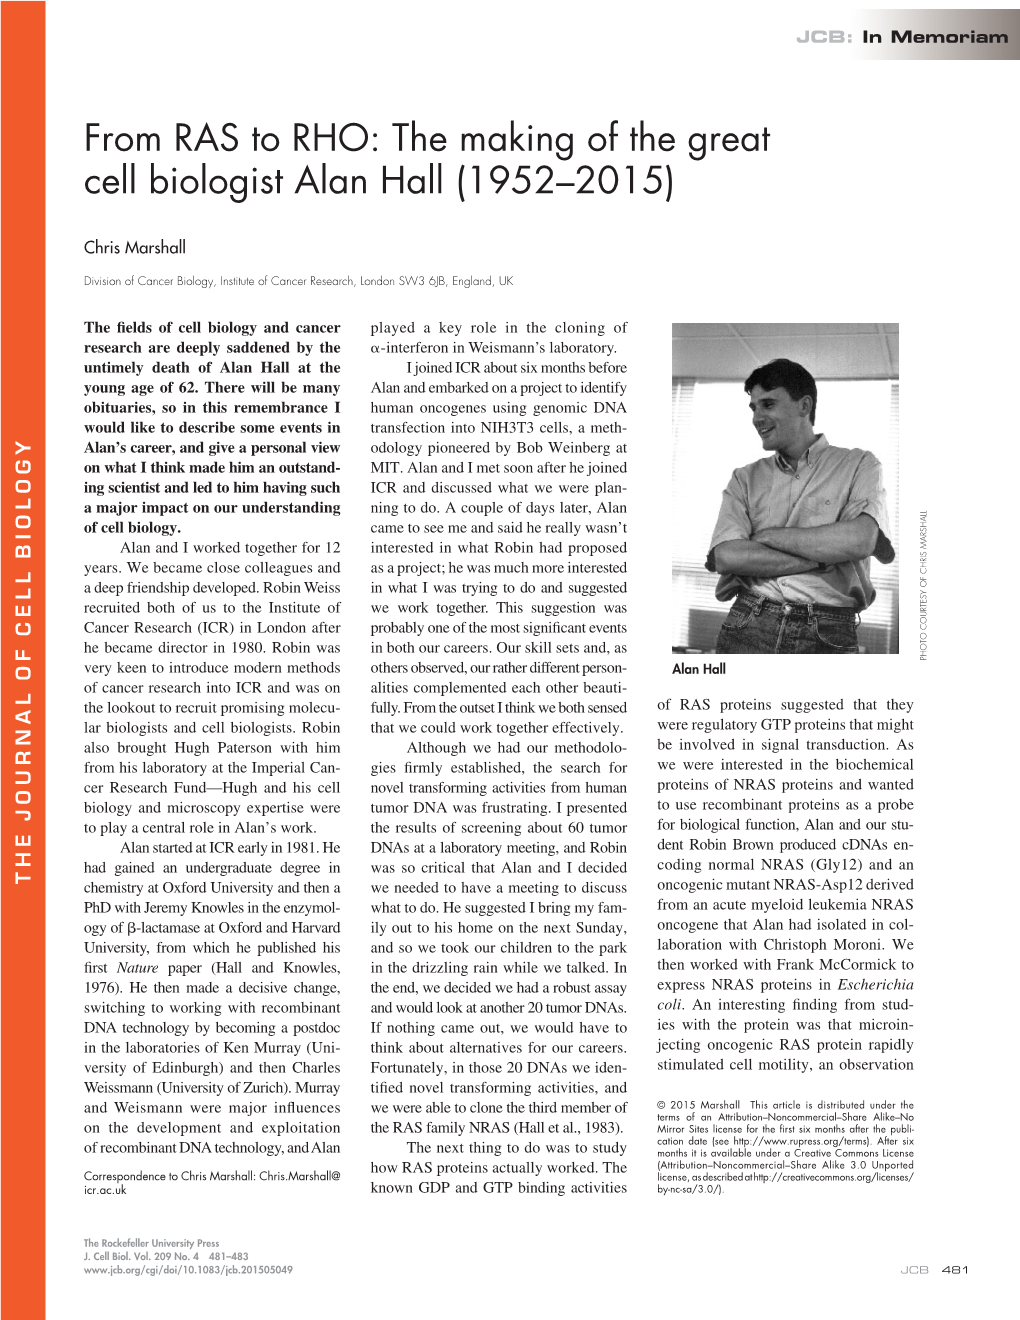 The Making of the Great Cell Biologist Alan Hall (1952–2015)